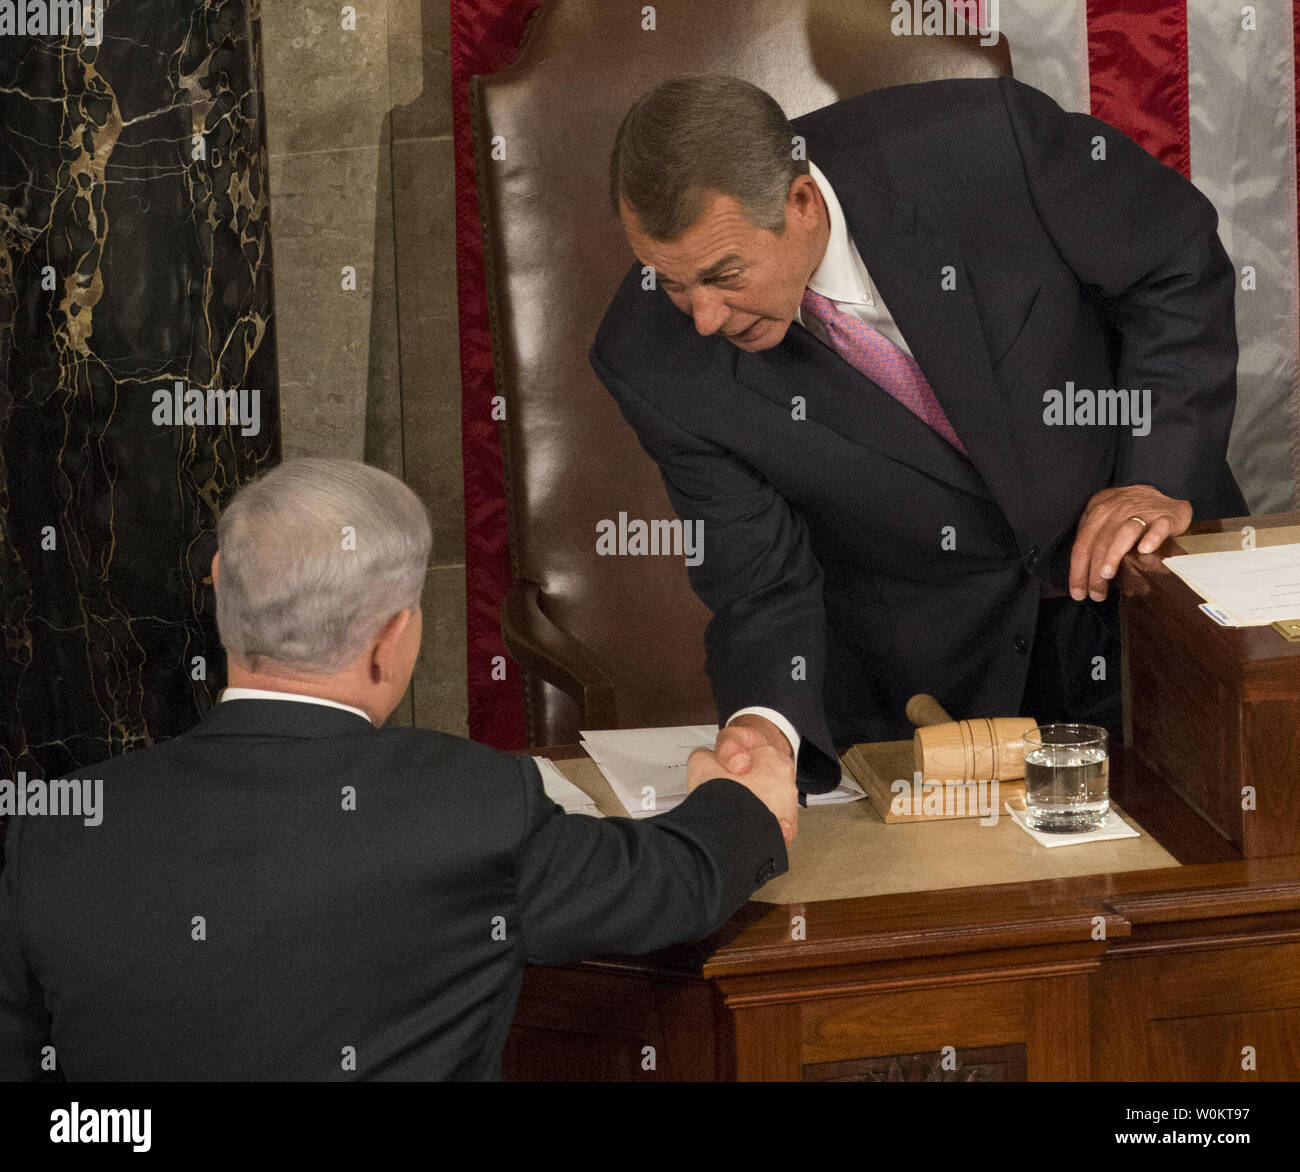 Israeli Prime Minister Benjamin Netanyahu shakes hands with Republican House Speaker John Boehner (R), who invited Netanyahu, as he arrives to address a joint session of the United States Congress on Capitol Hill in Washington, DC on March 3, 2015.    In a divisive speech, Netanyahu argued against any deal with Iran on their nuclear capability as nuclear negotiations continue with the Obama administration and Iran in Geneva.  Photo by Pat Benic/UPI Stock Photo